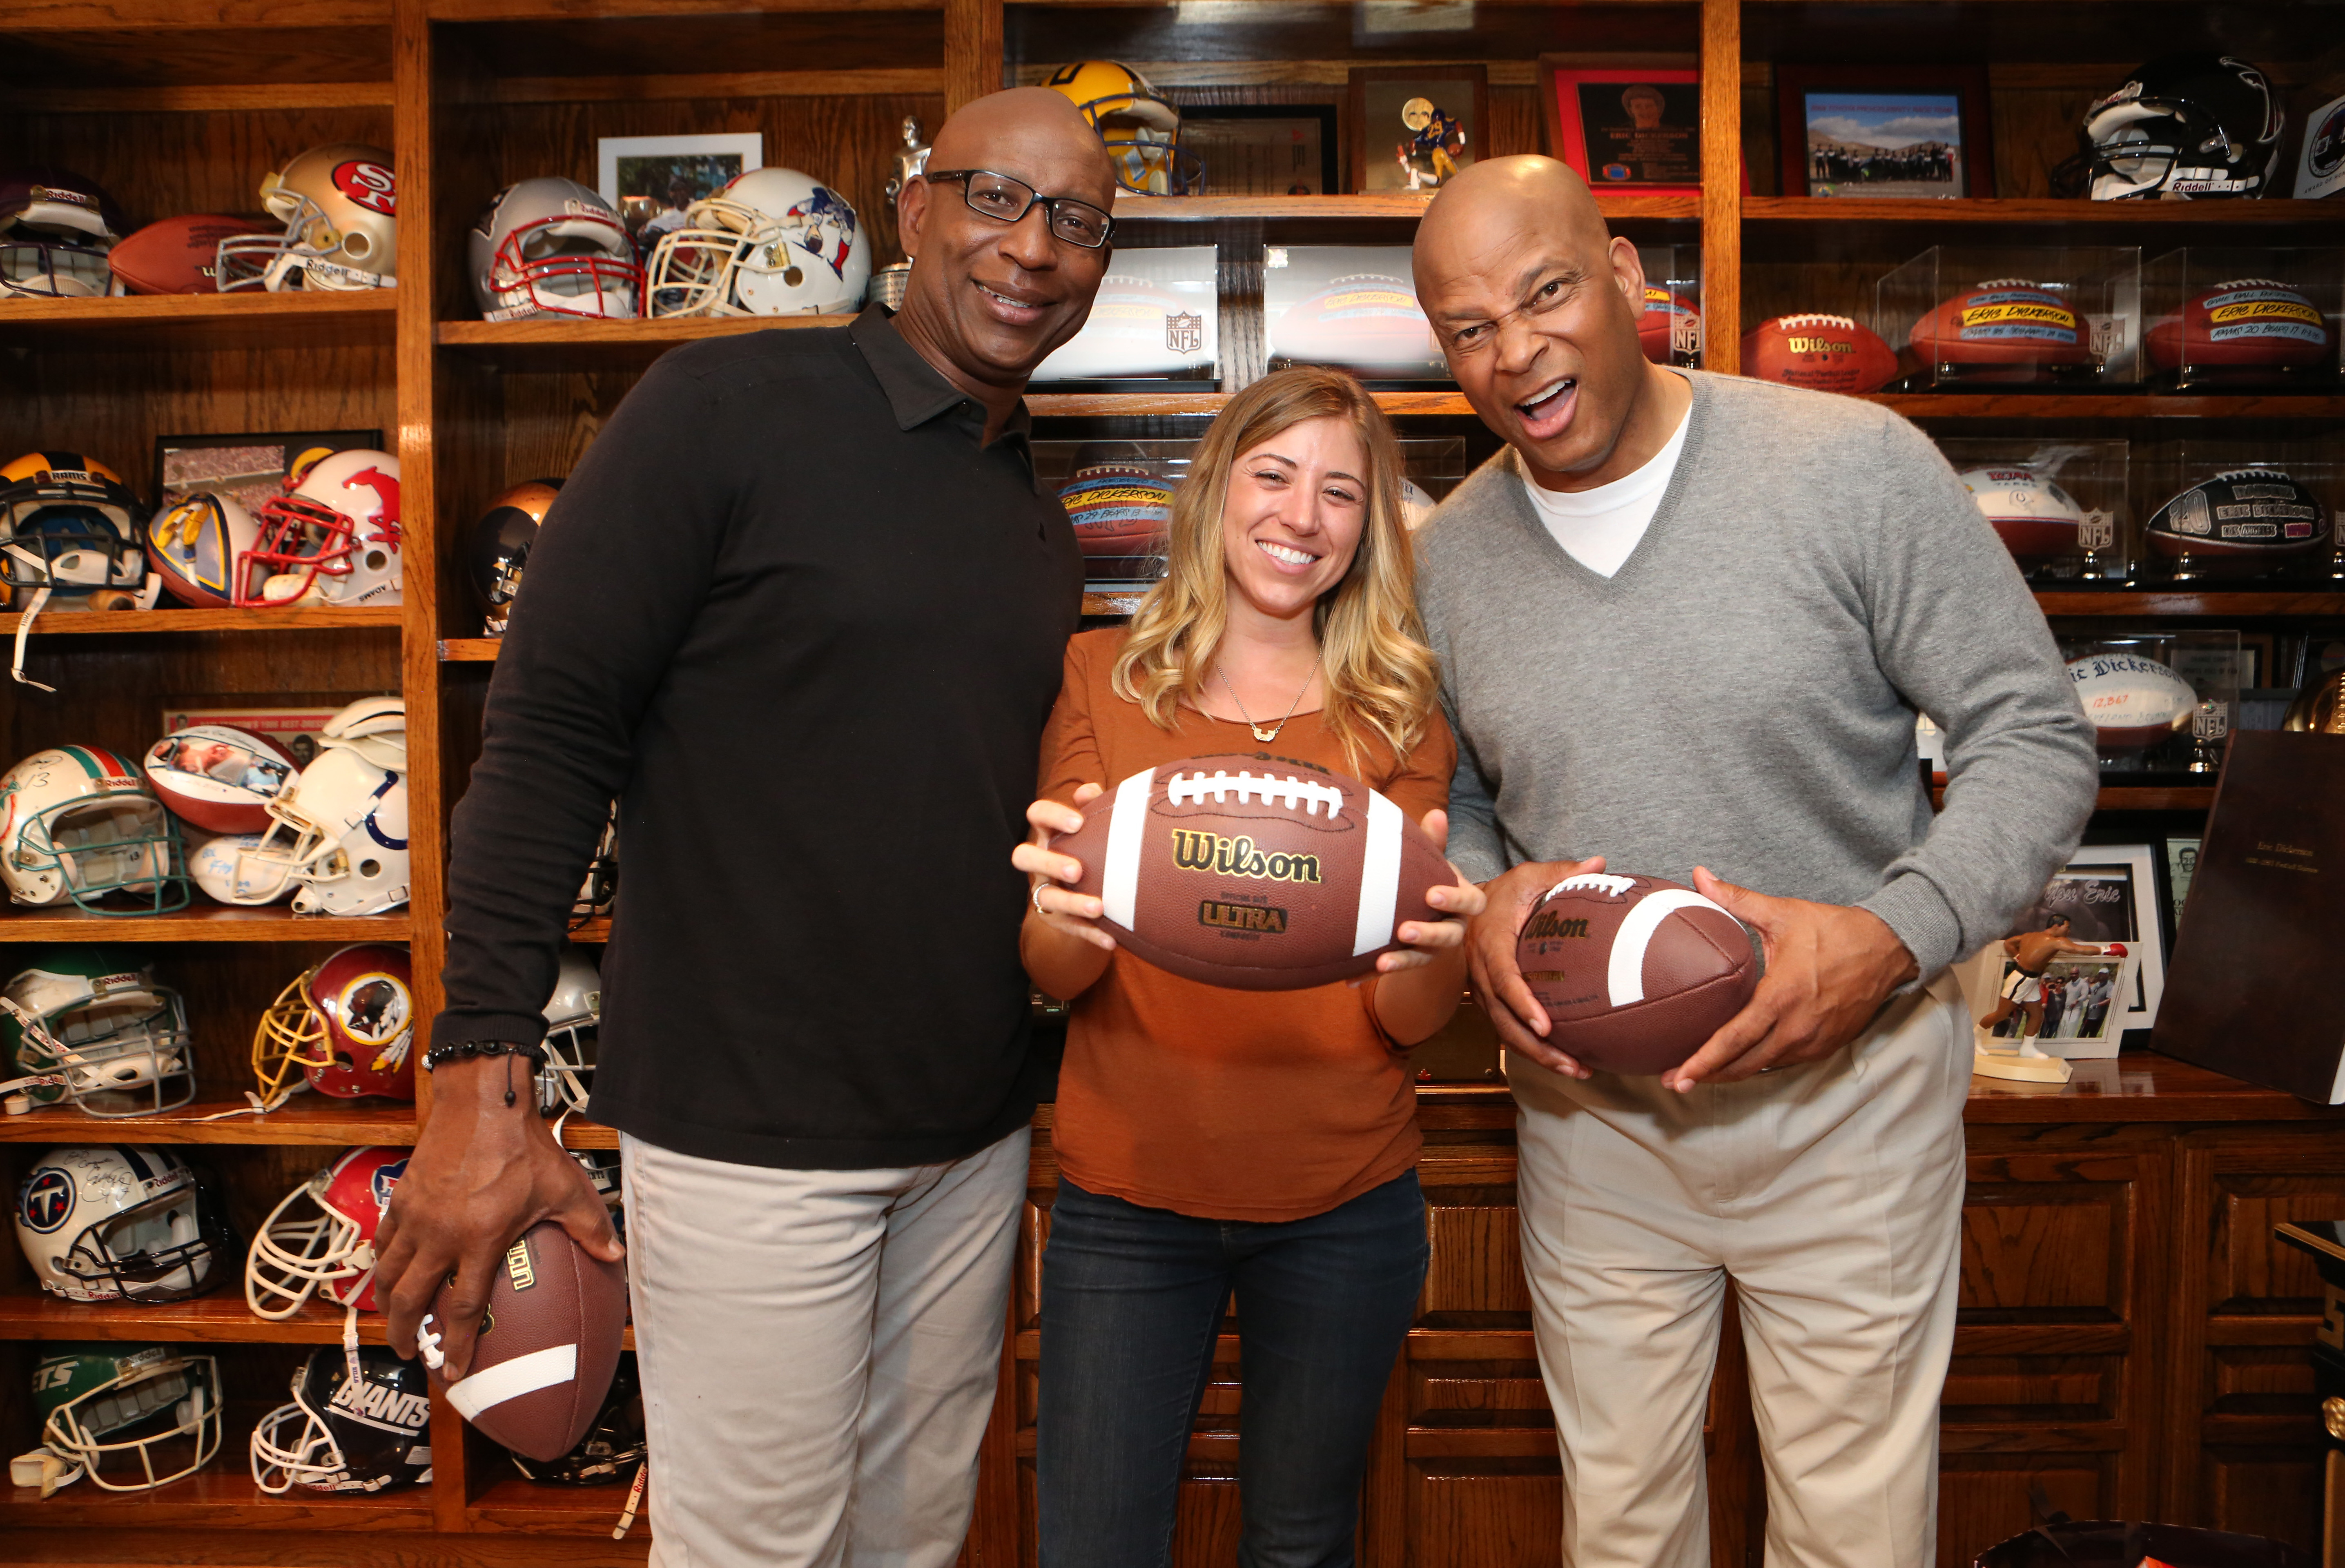 Sarah Hummert is behind the scenes for Butterfinger with Eric Dickerson and Ronnie Lott.